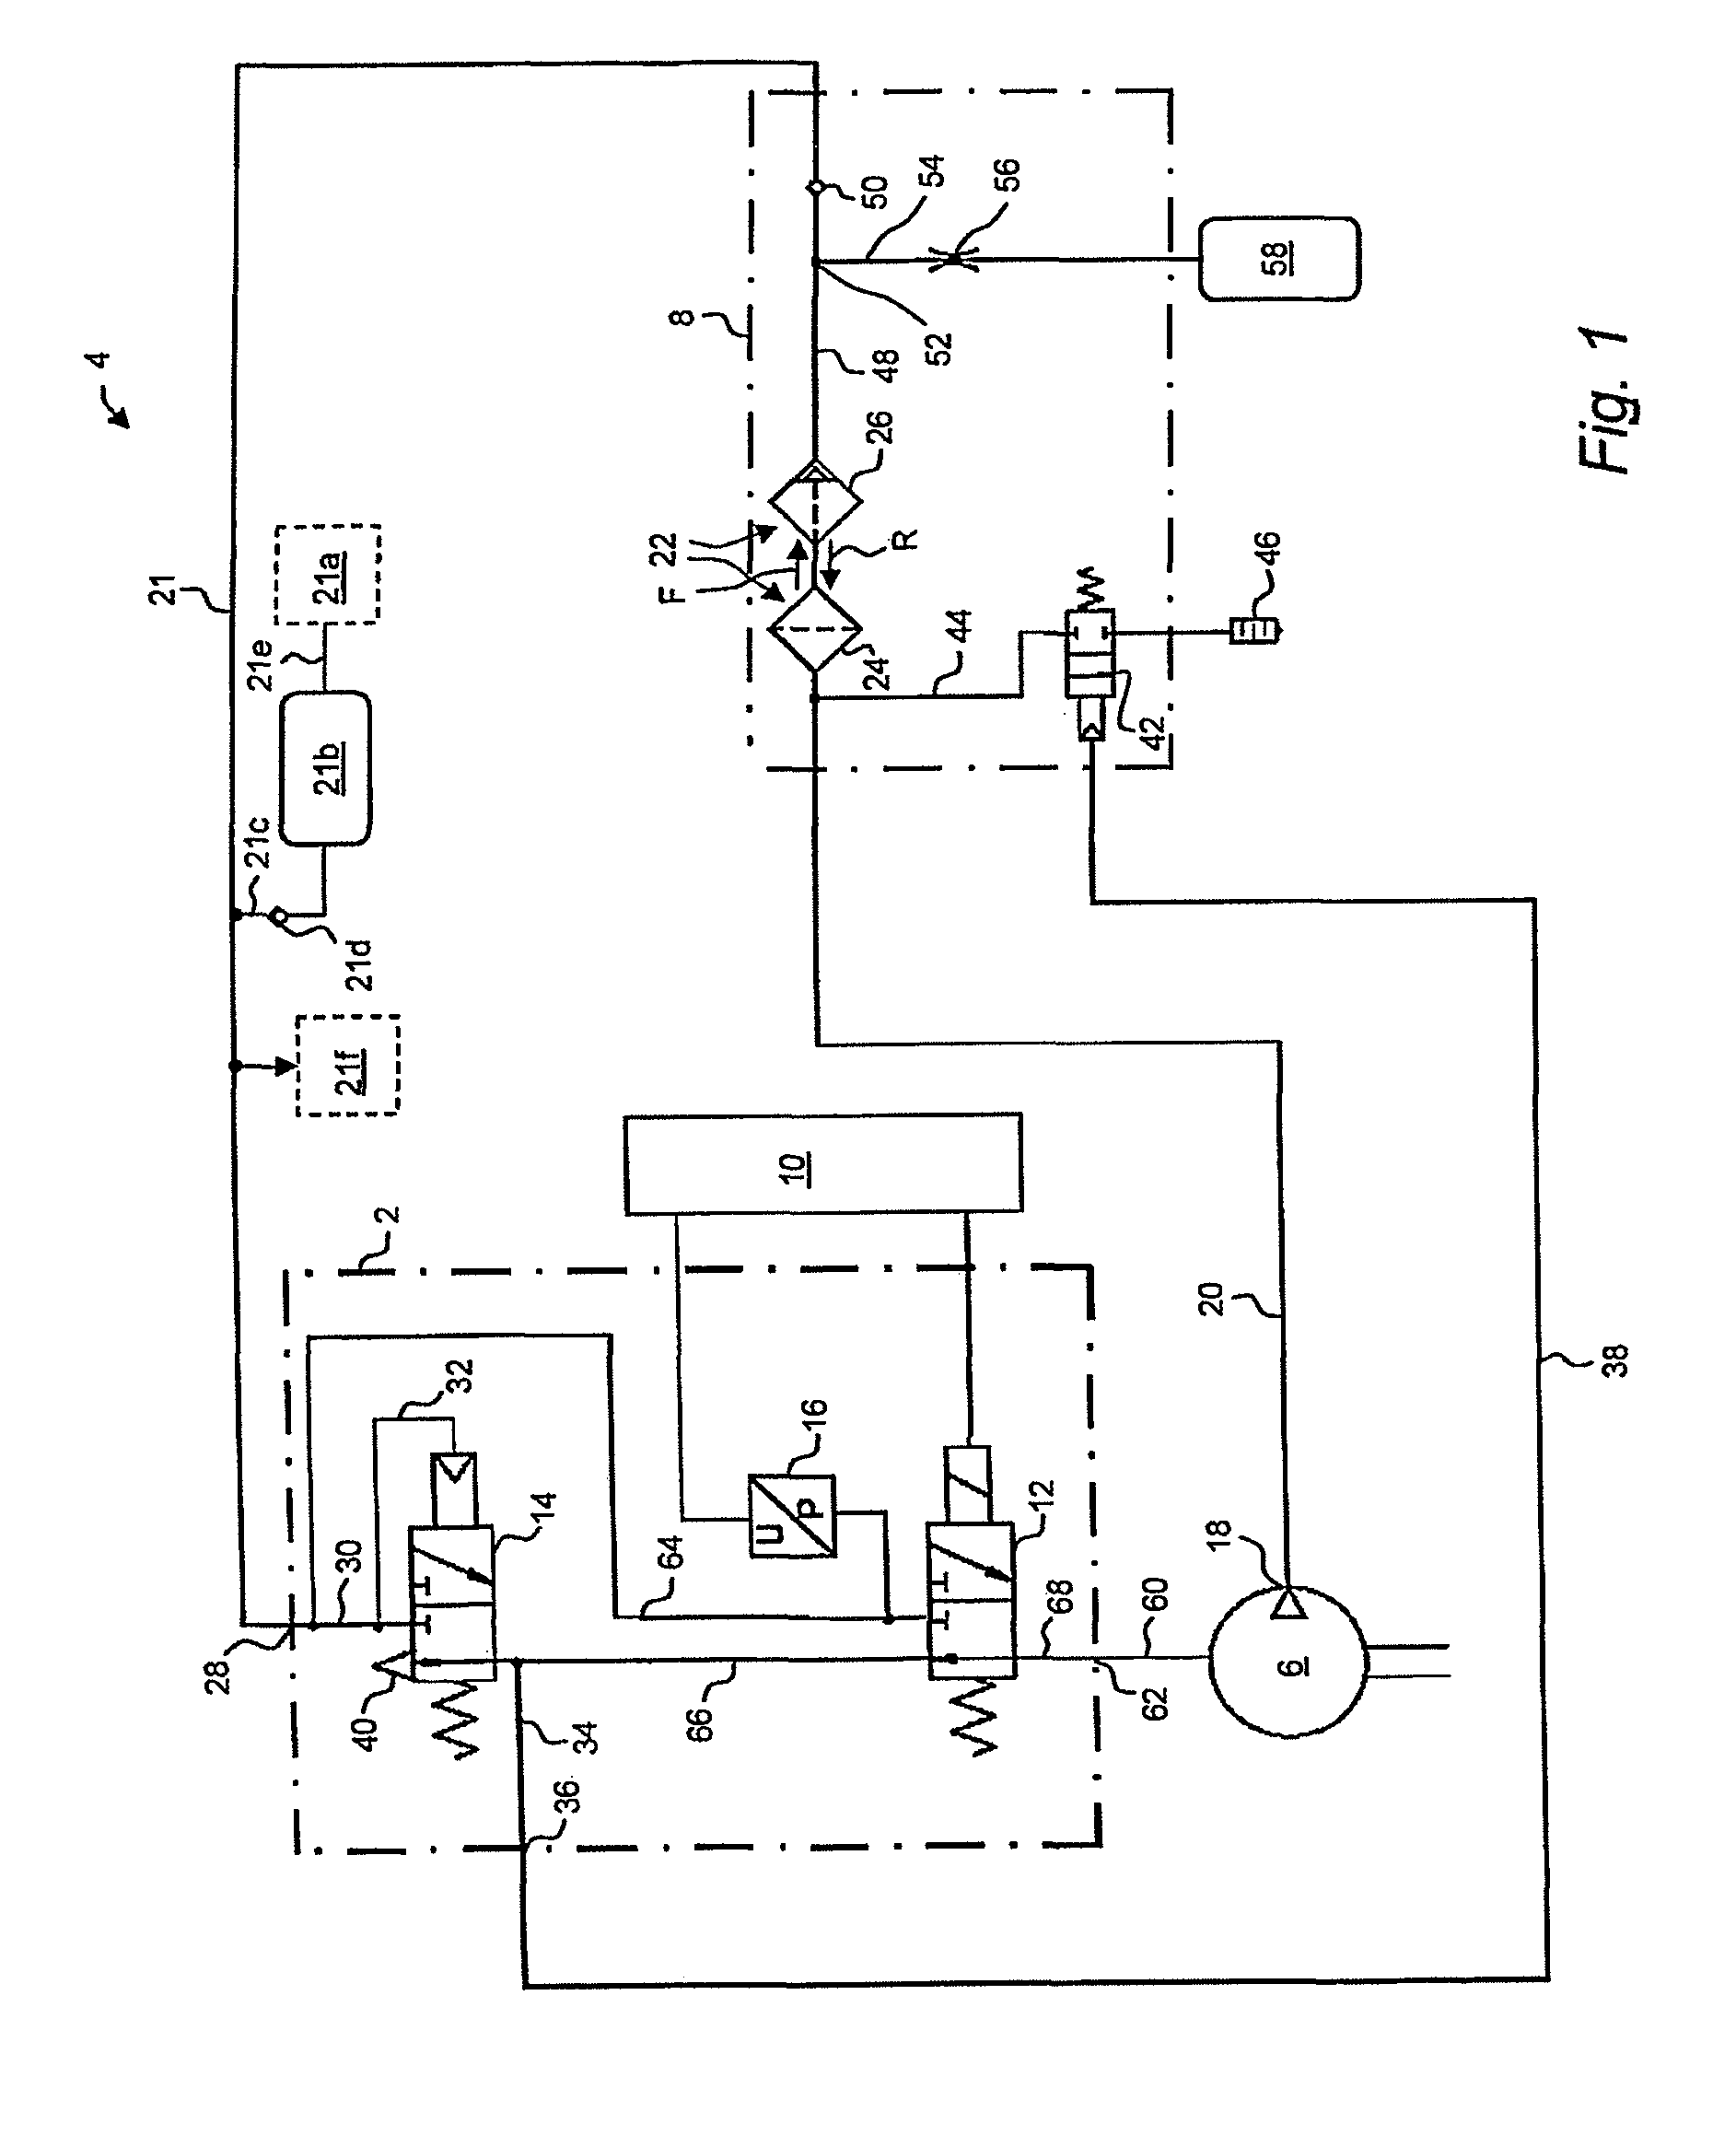 Device, method and system for compressed air control and compressed air supply